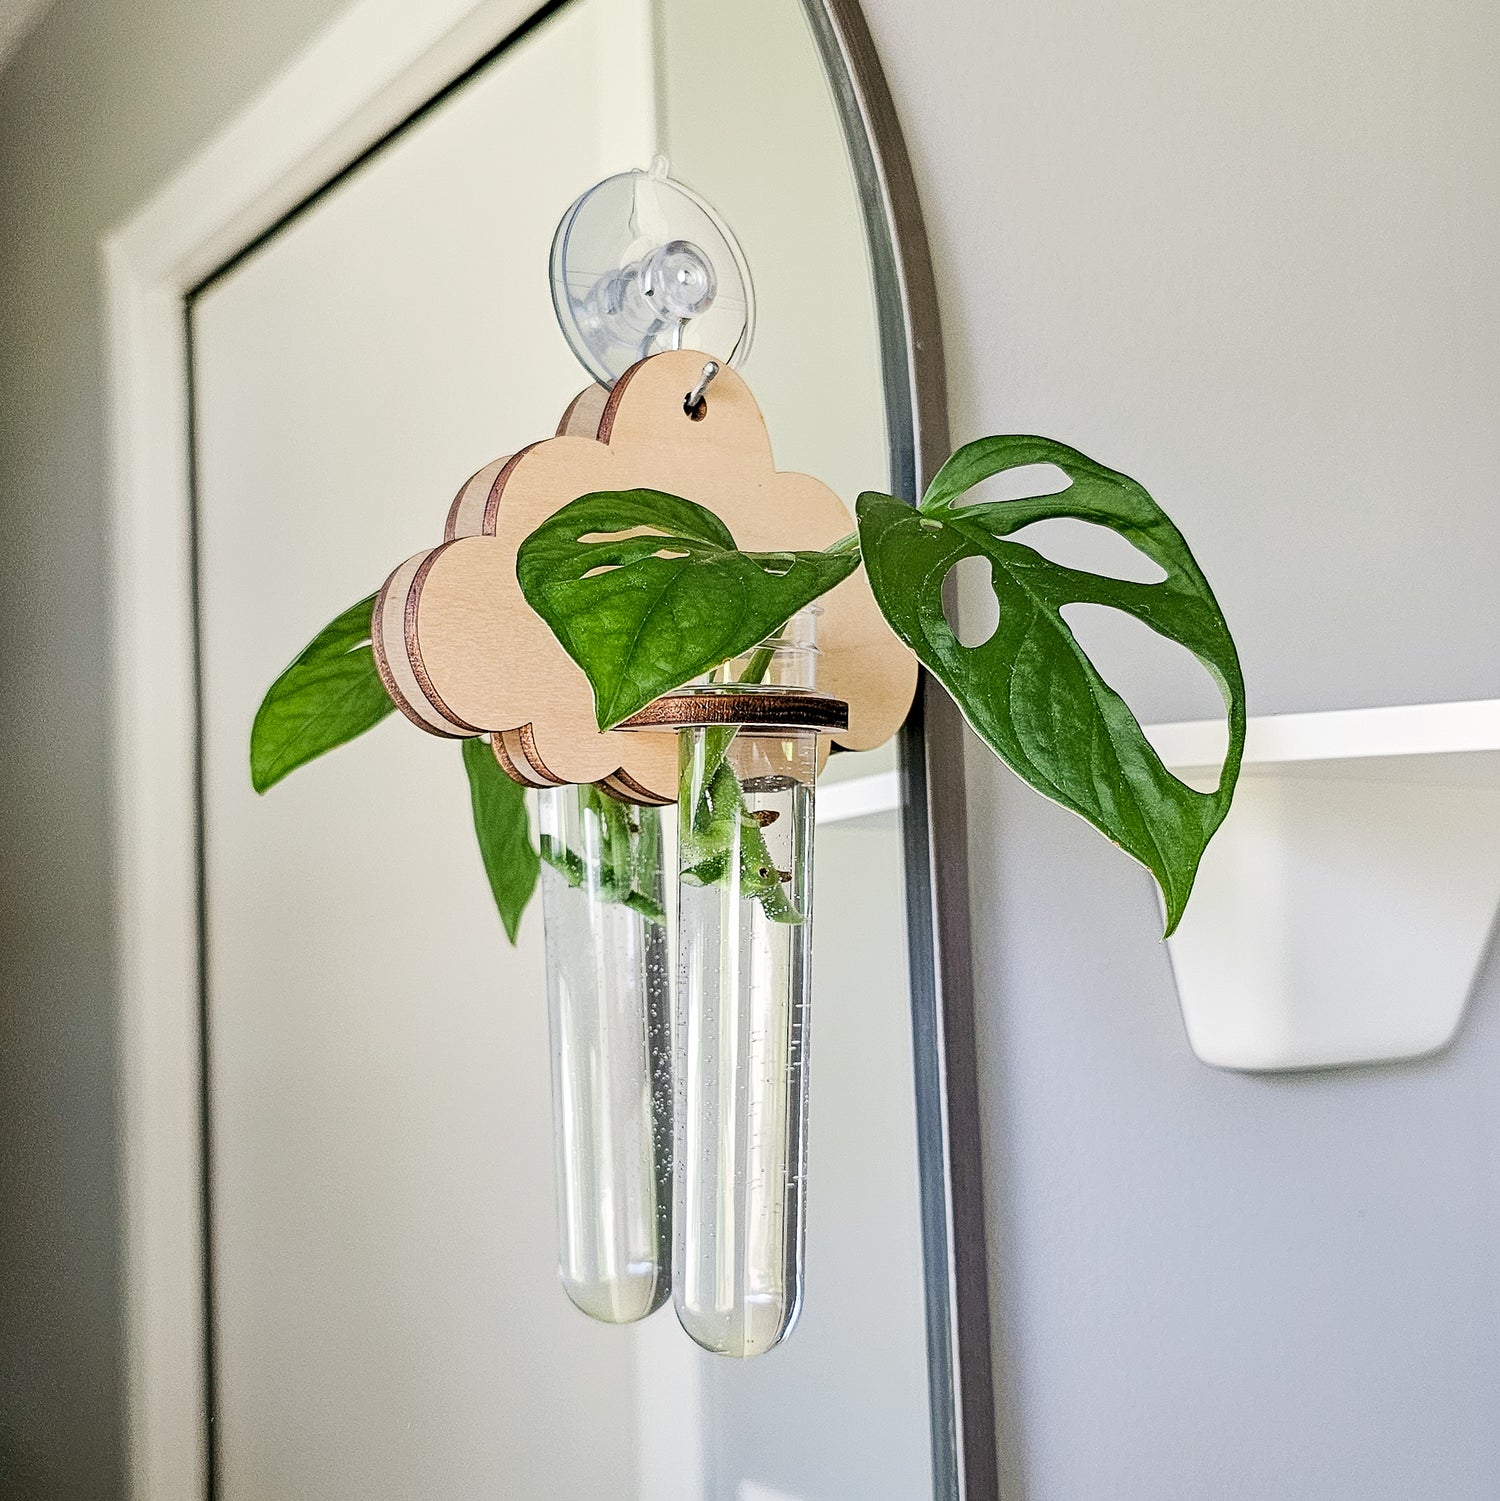 Wall hanging test tube propagation station for growing roots on plant cuttings in water. Two small, light colored wood plant hangers in a cloud design with monstera leaf cuttings.